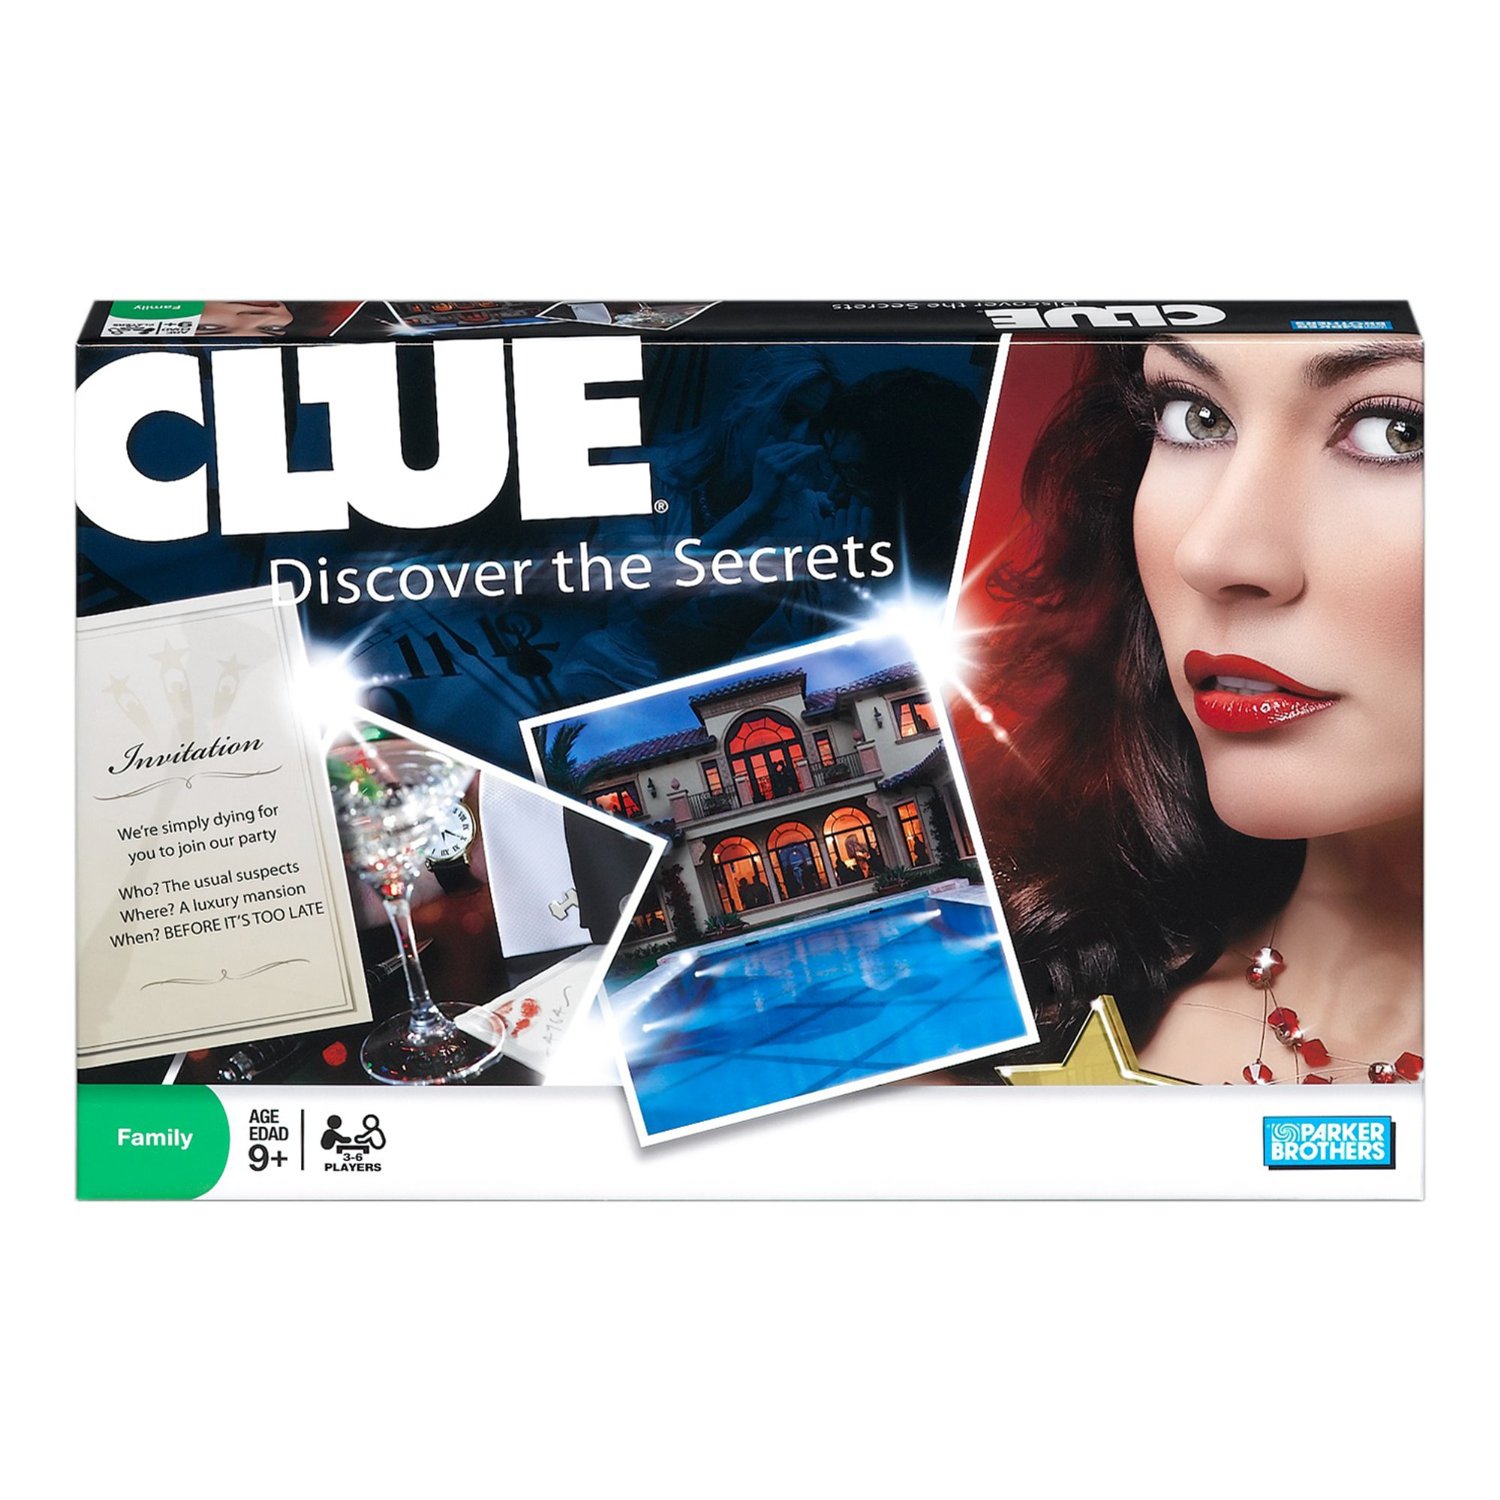 The Cluedo box looks rather different today from when Squinter played it round the kitchen table